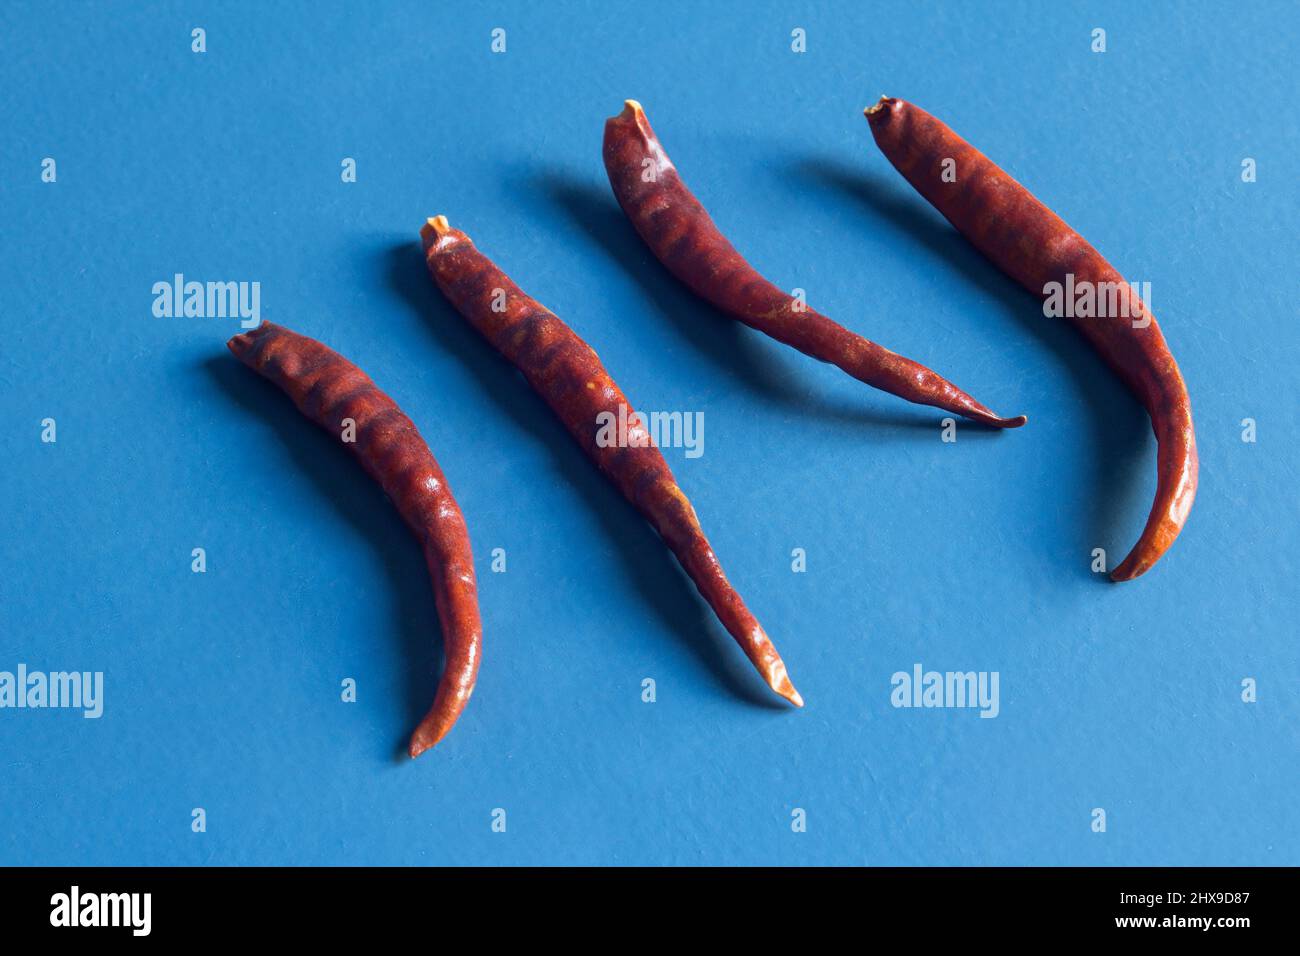 Dried and dehydrated chilies peppers in a row on a blue painted wooden studio background. Food and vegetables. Stock Photo